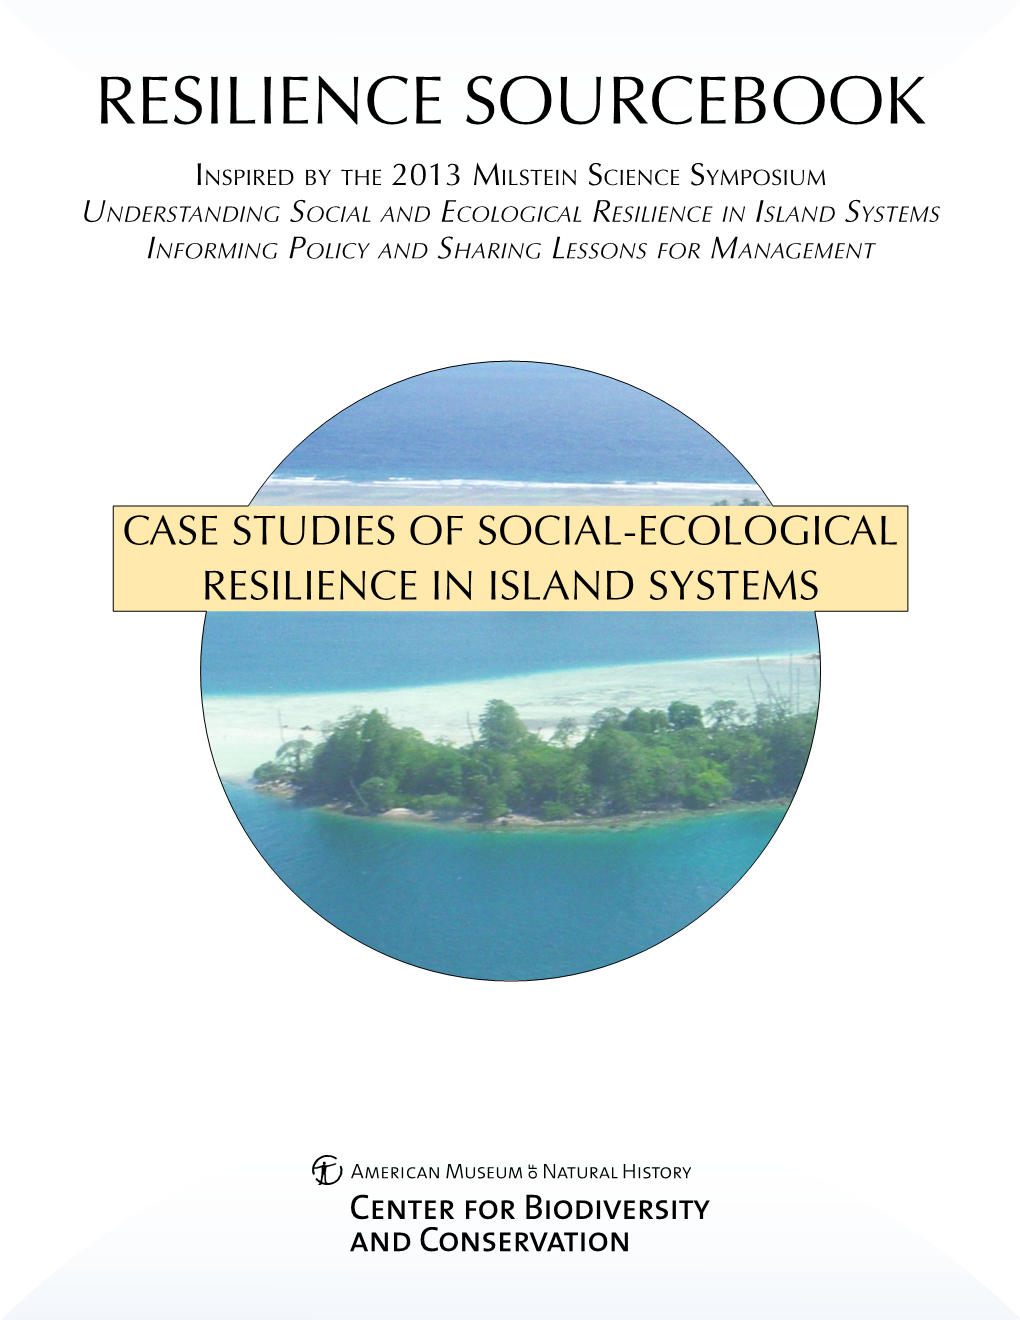 Case Studies of Social-Ecological Resilience in Island Systems